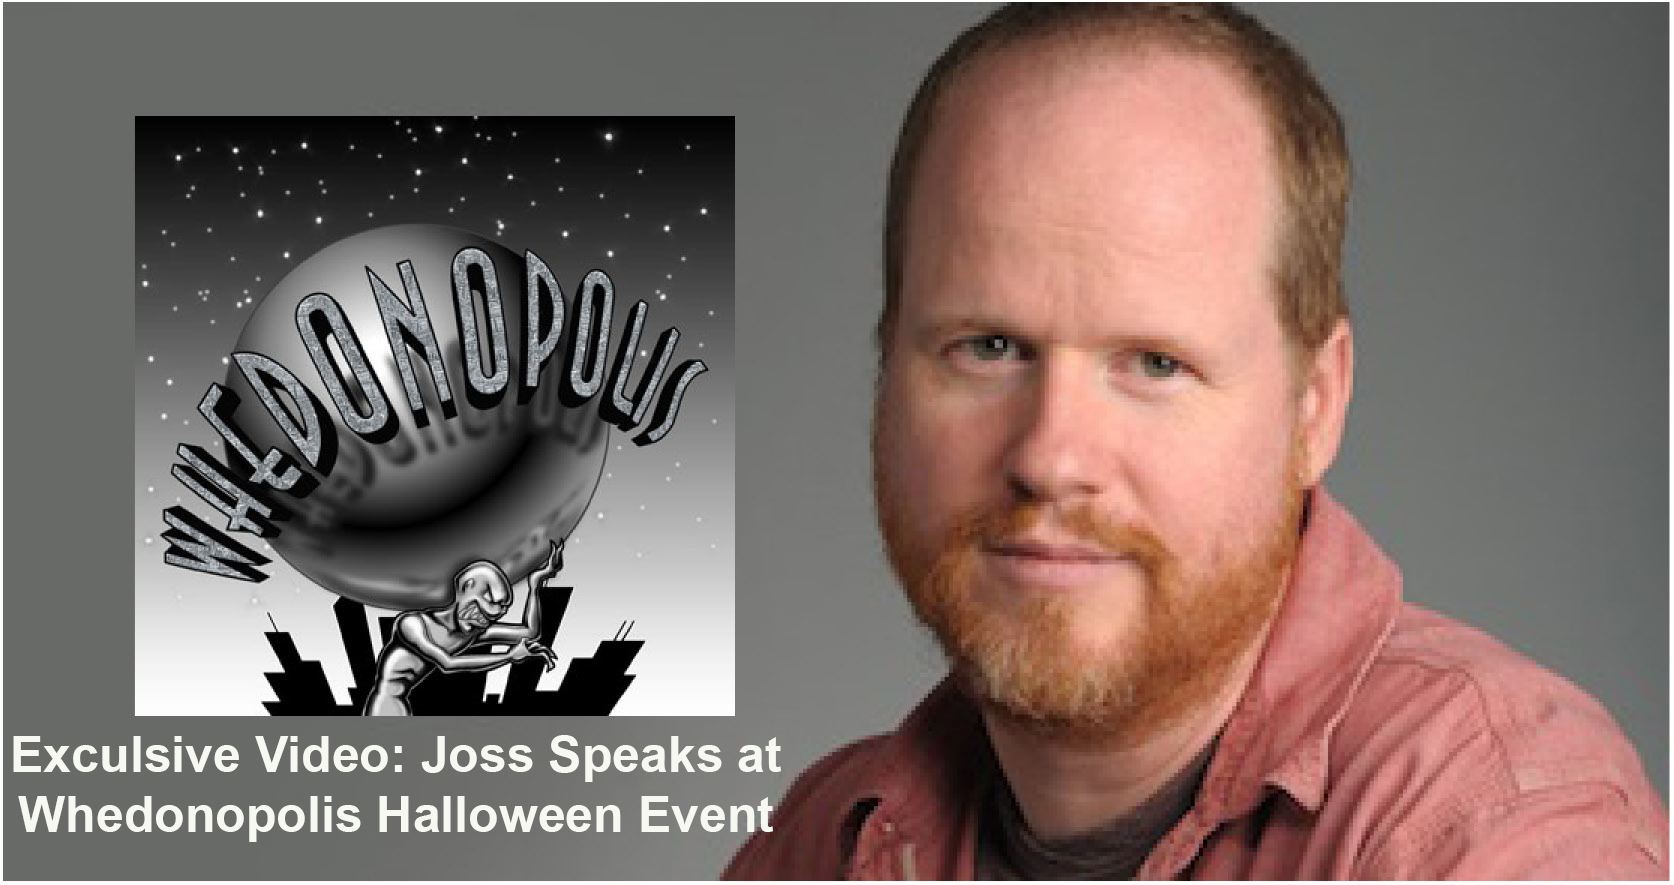 Exclusive Video: Joss Whedon Speaks at Whedonopolis Halloween Event